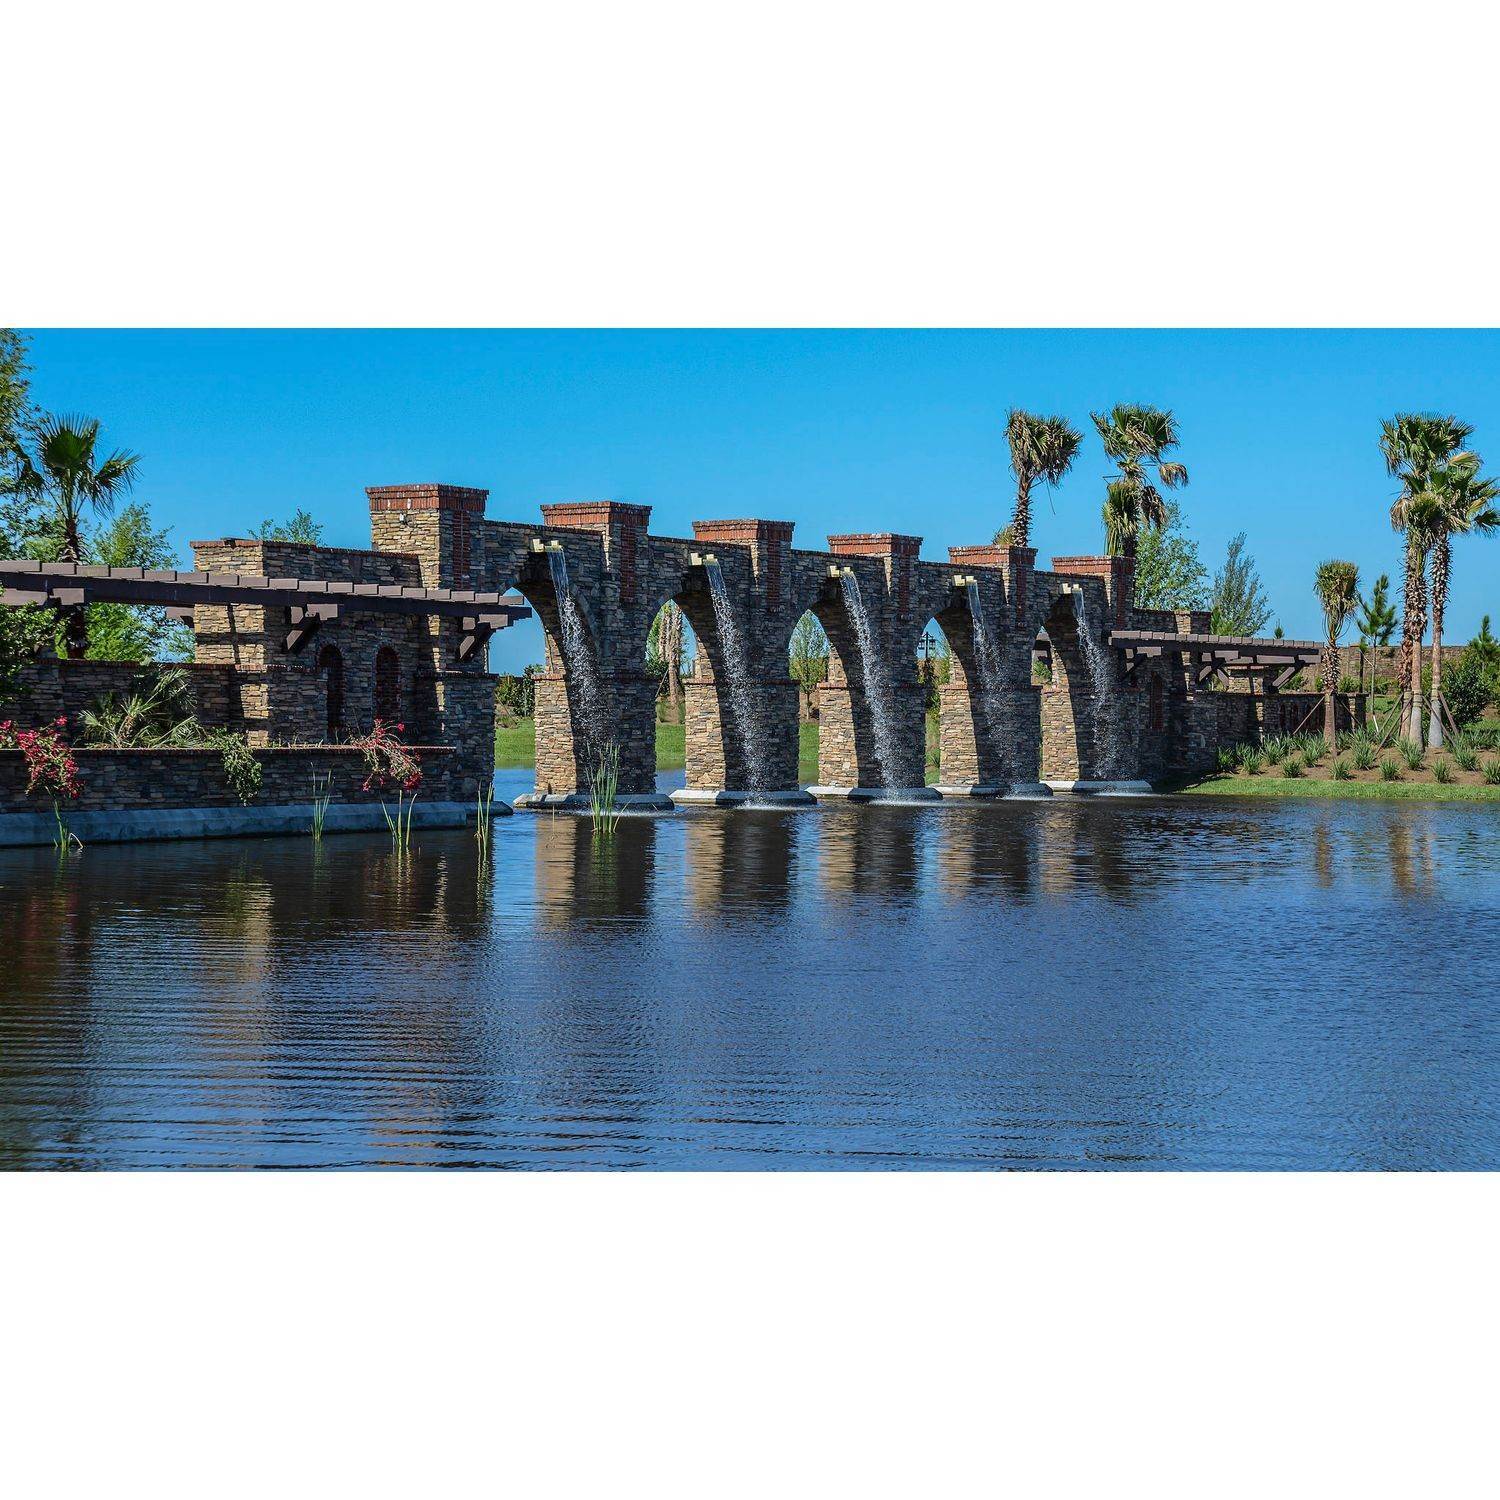 8. Eave's Bend at Artisan Lakes建於 5967 Maidenstone Way, Palmetto, FL 34221